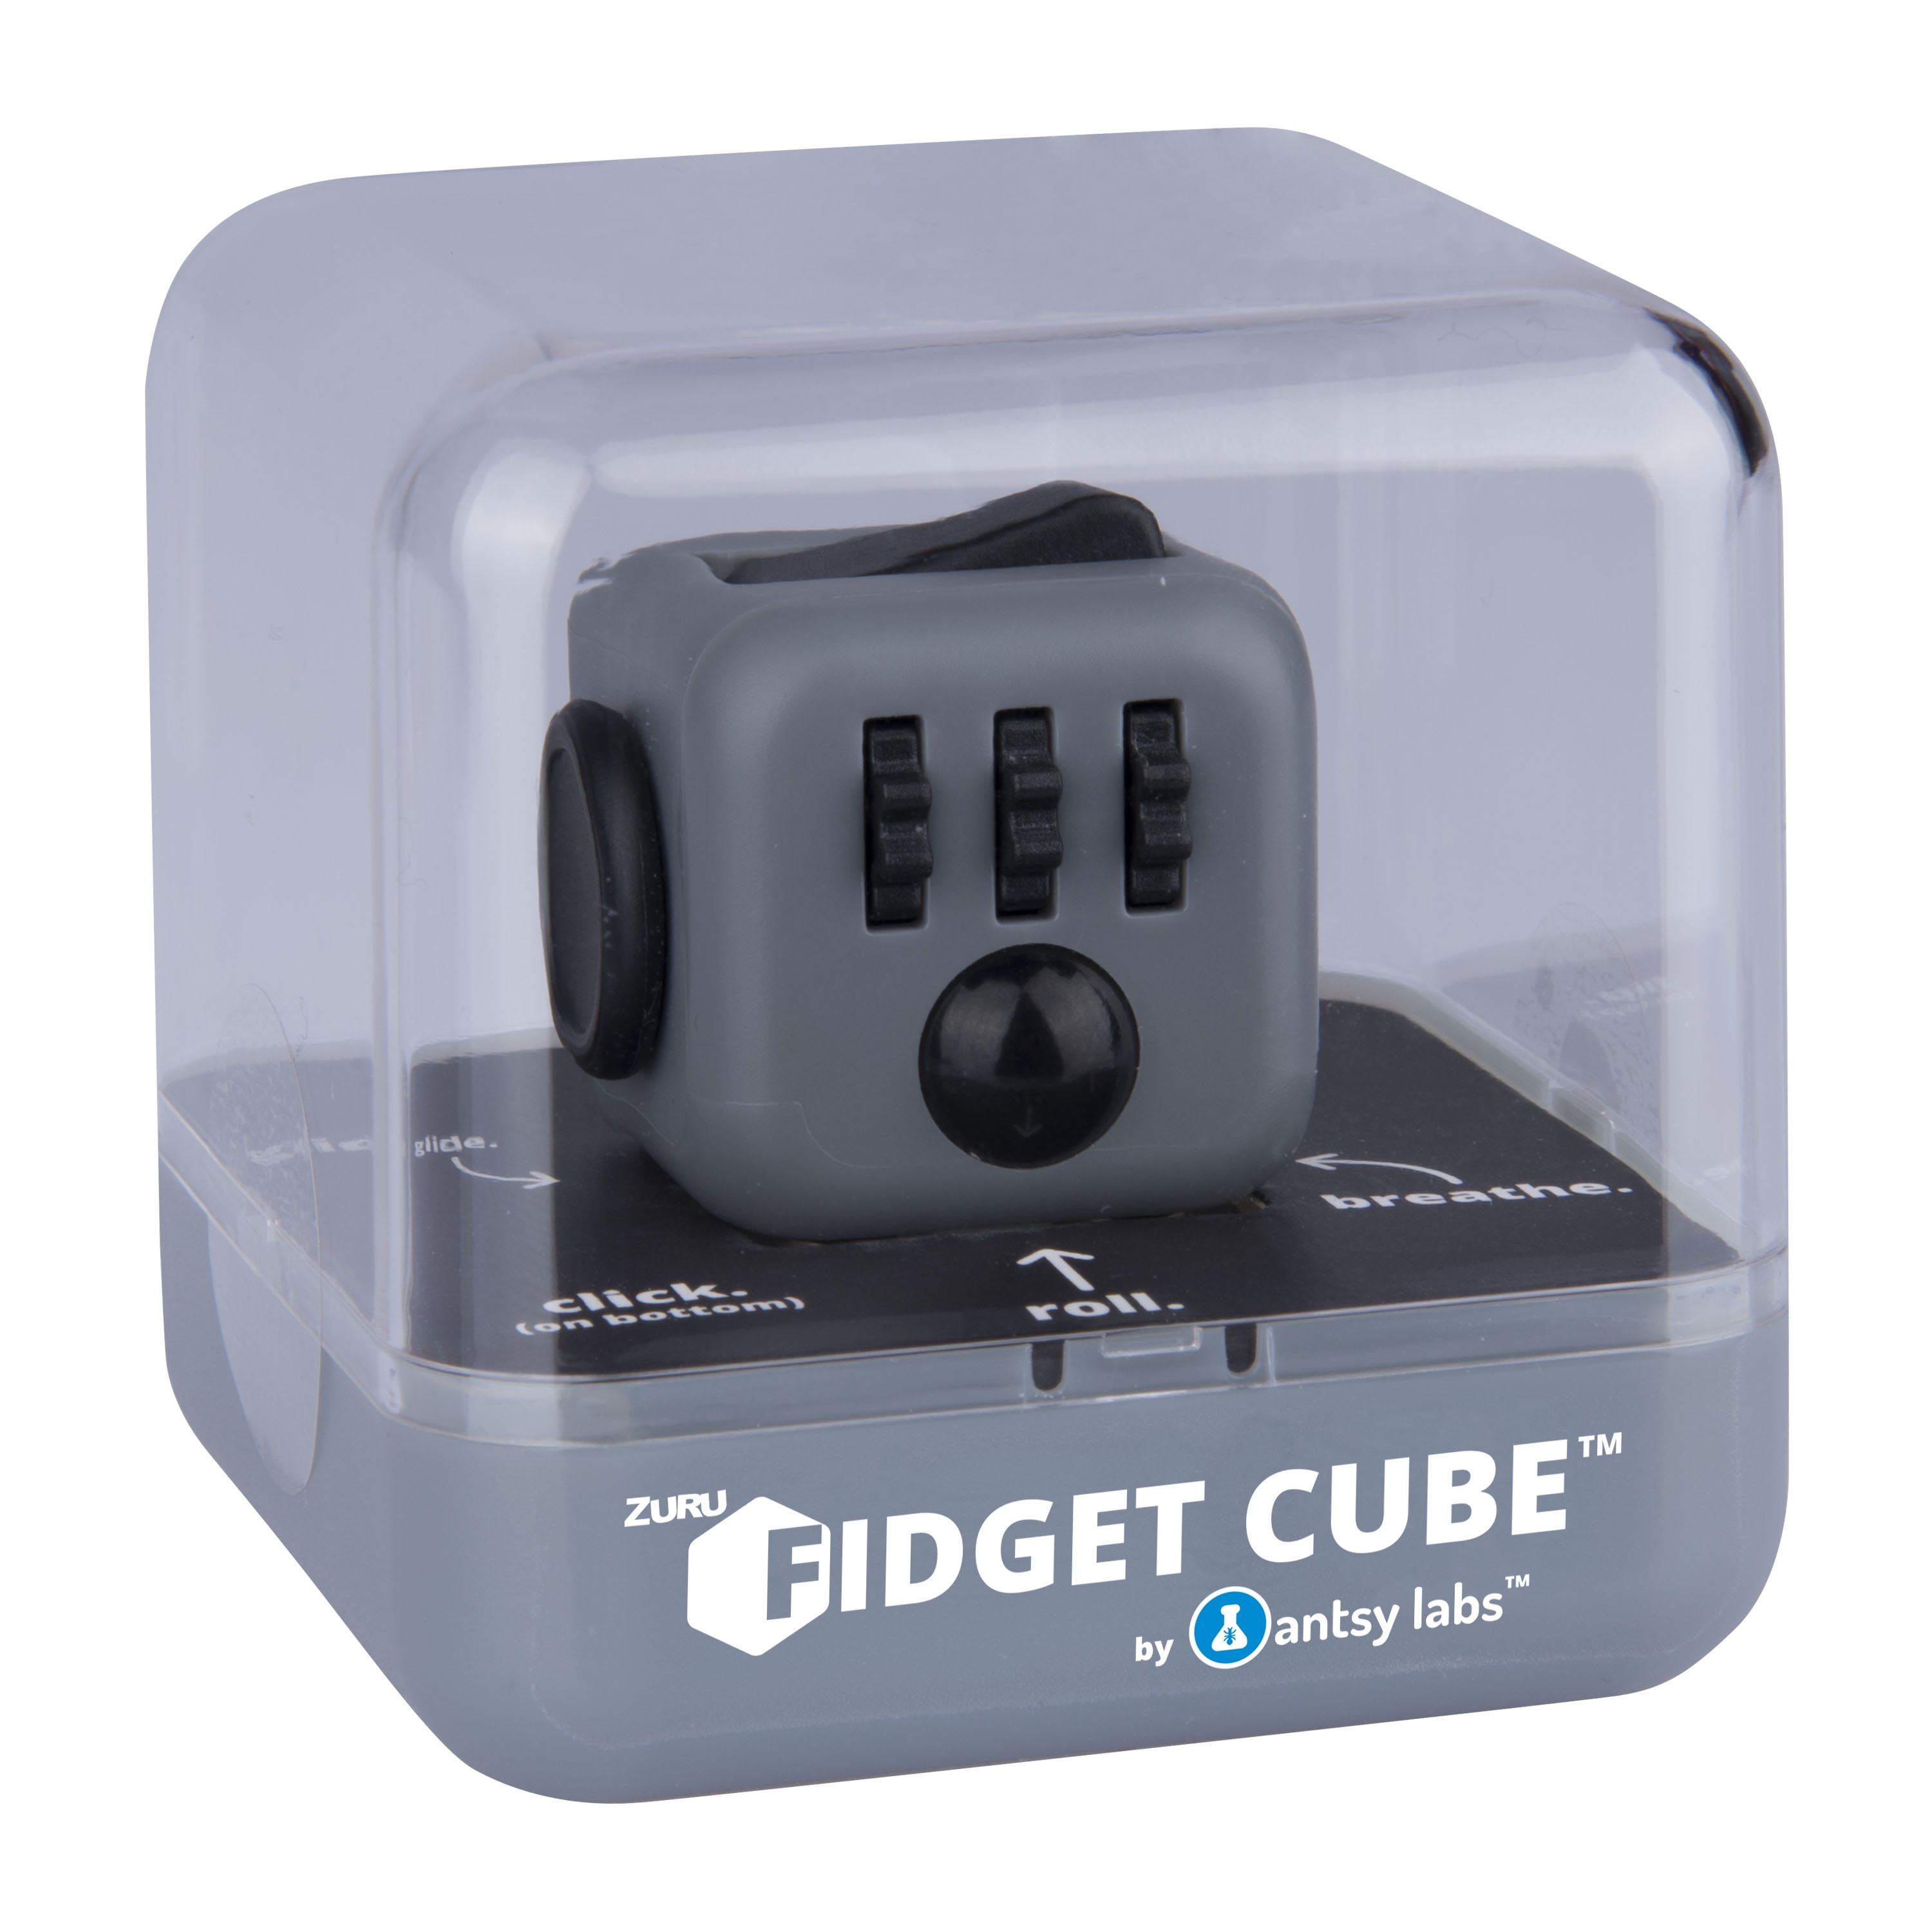 *IN STOCK* NEW 2017 FIDGET CUBE STRESS ANXIETY RELIEF 6 SIDED DESK TOY @ USA 